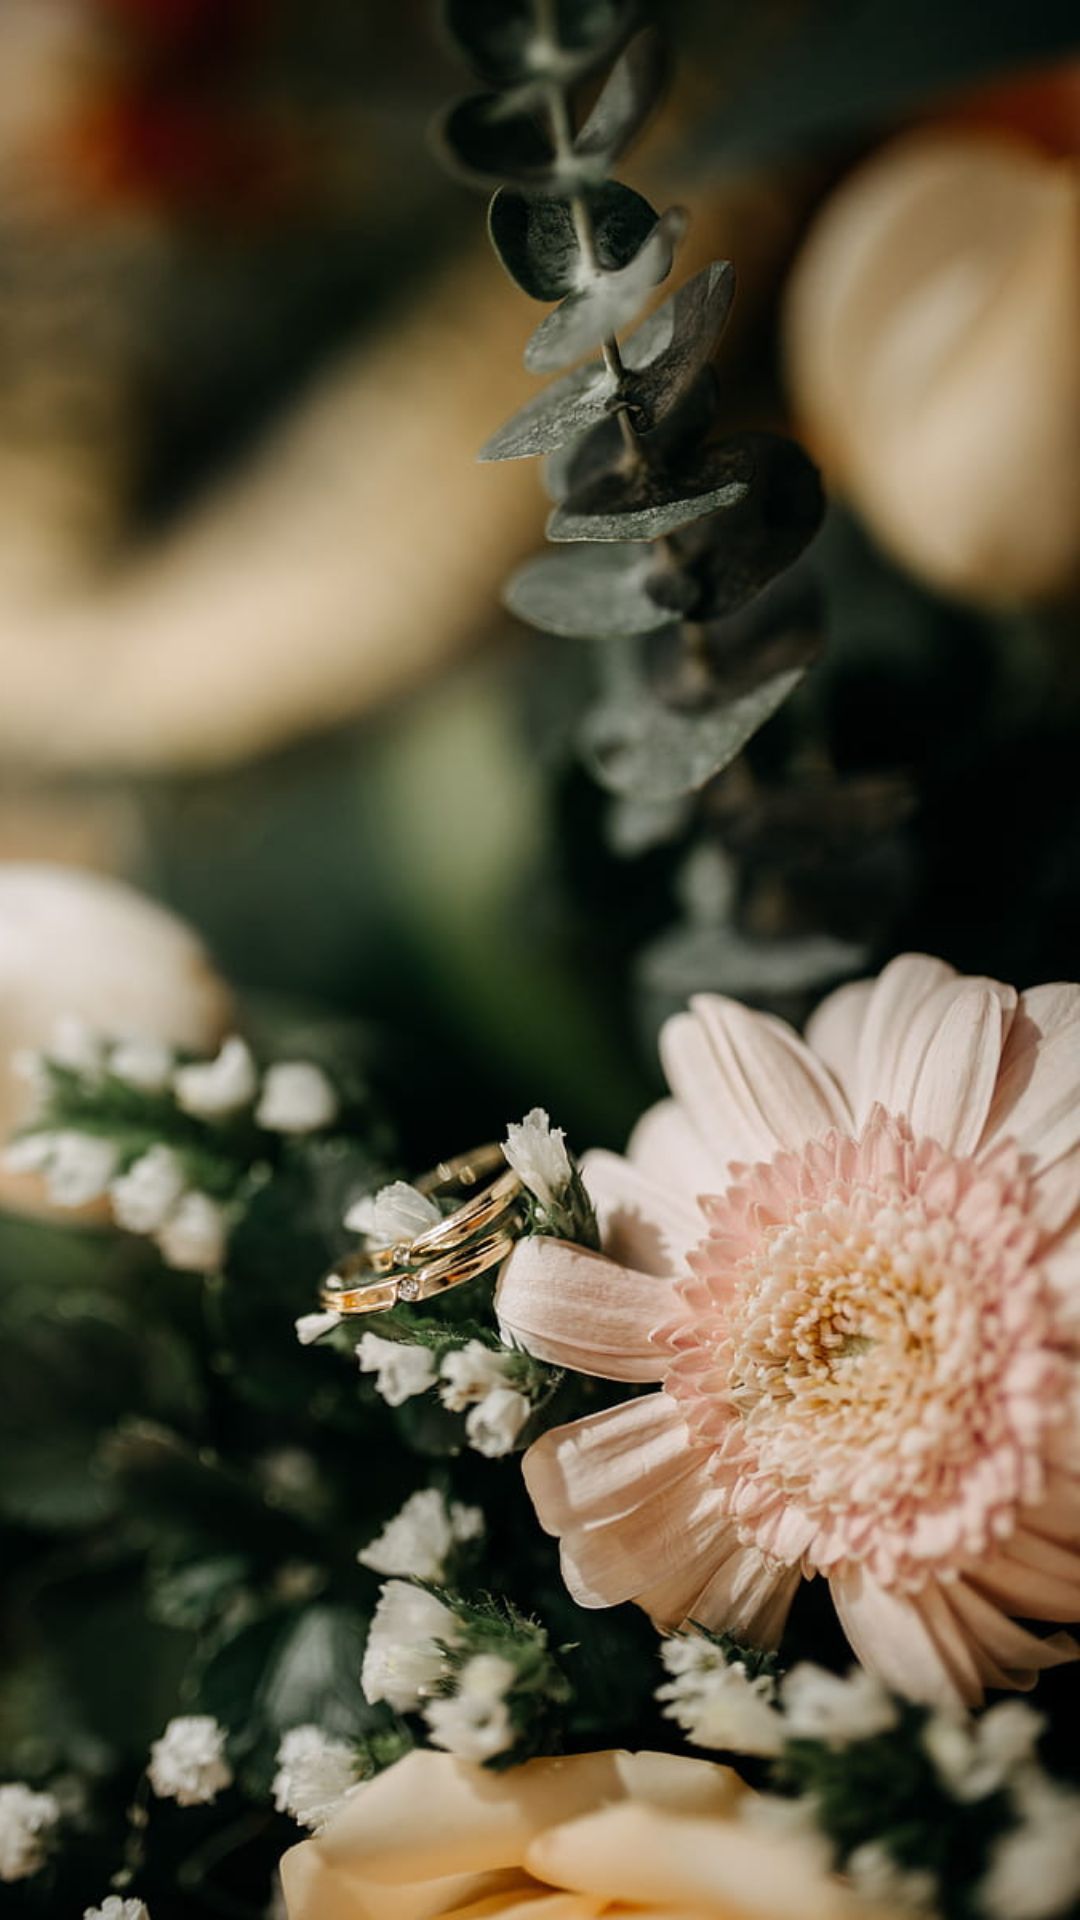 A pair of wedding rings on a pink flower - Wedding